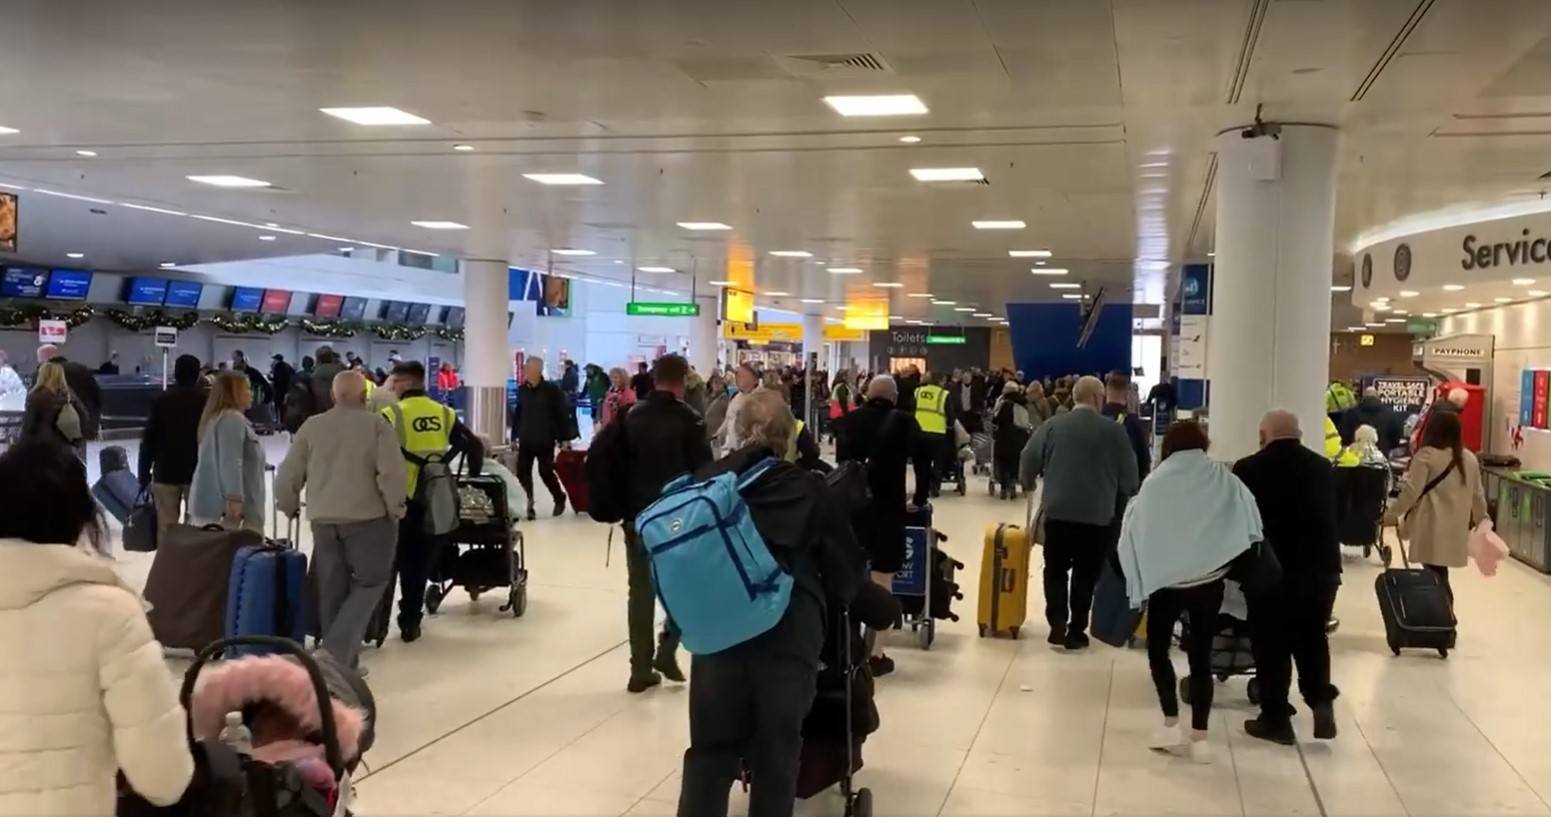 Glasgow Airport is gearing up for one of its busiest periods of the year